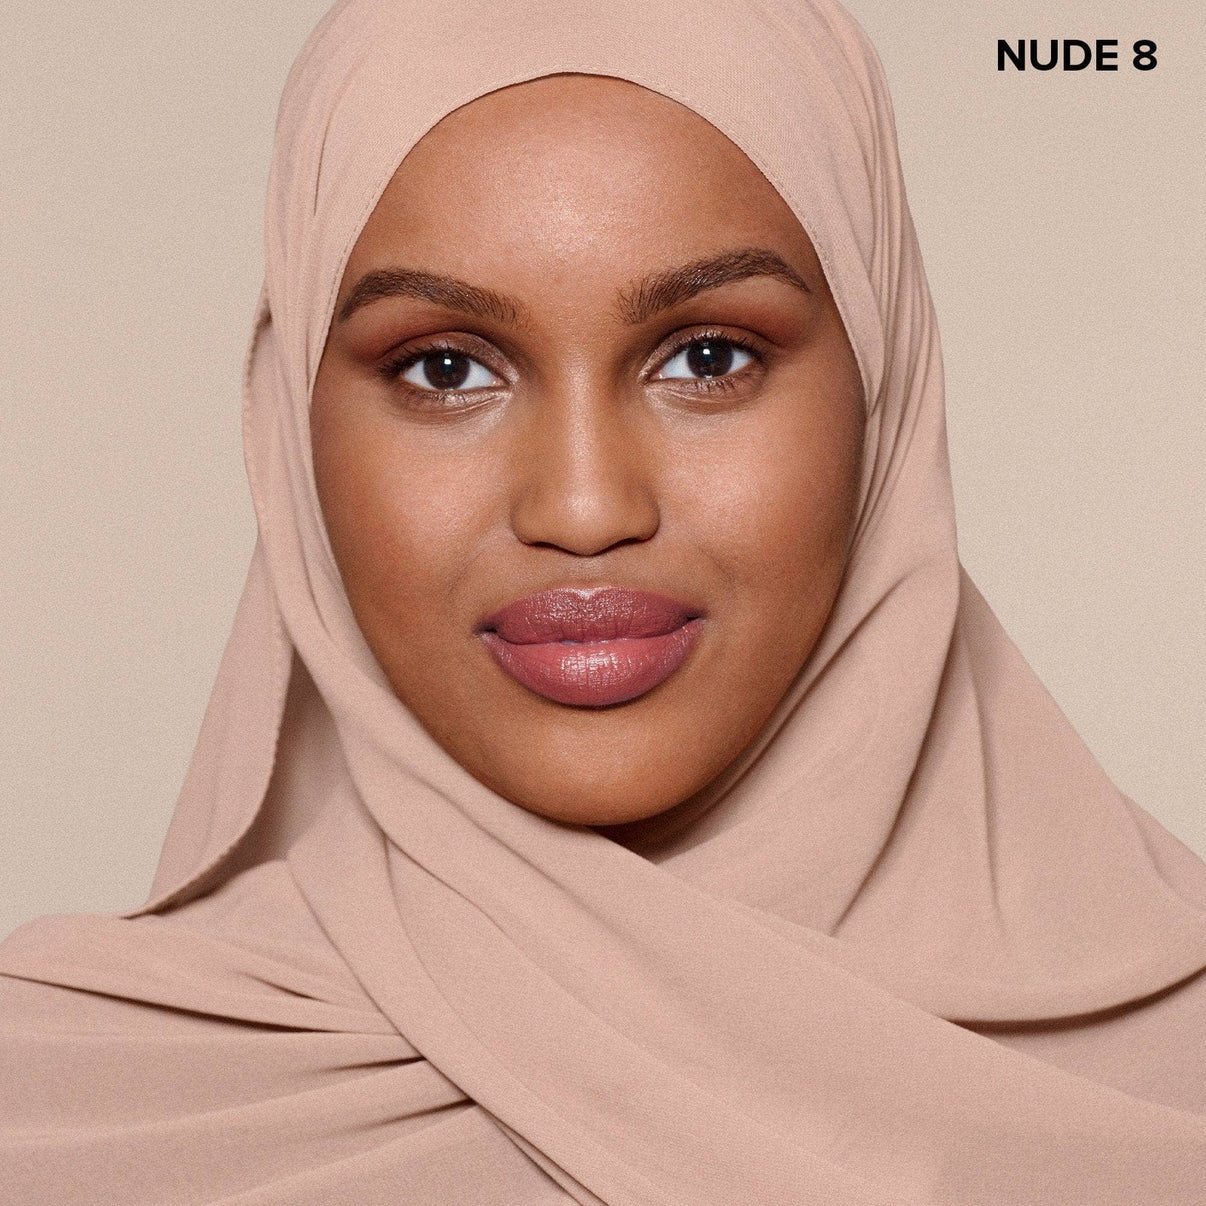 Brown skinned young woman wearing Nudefix cream concealer in shade nude 8